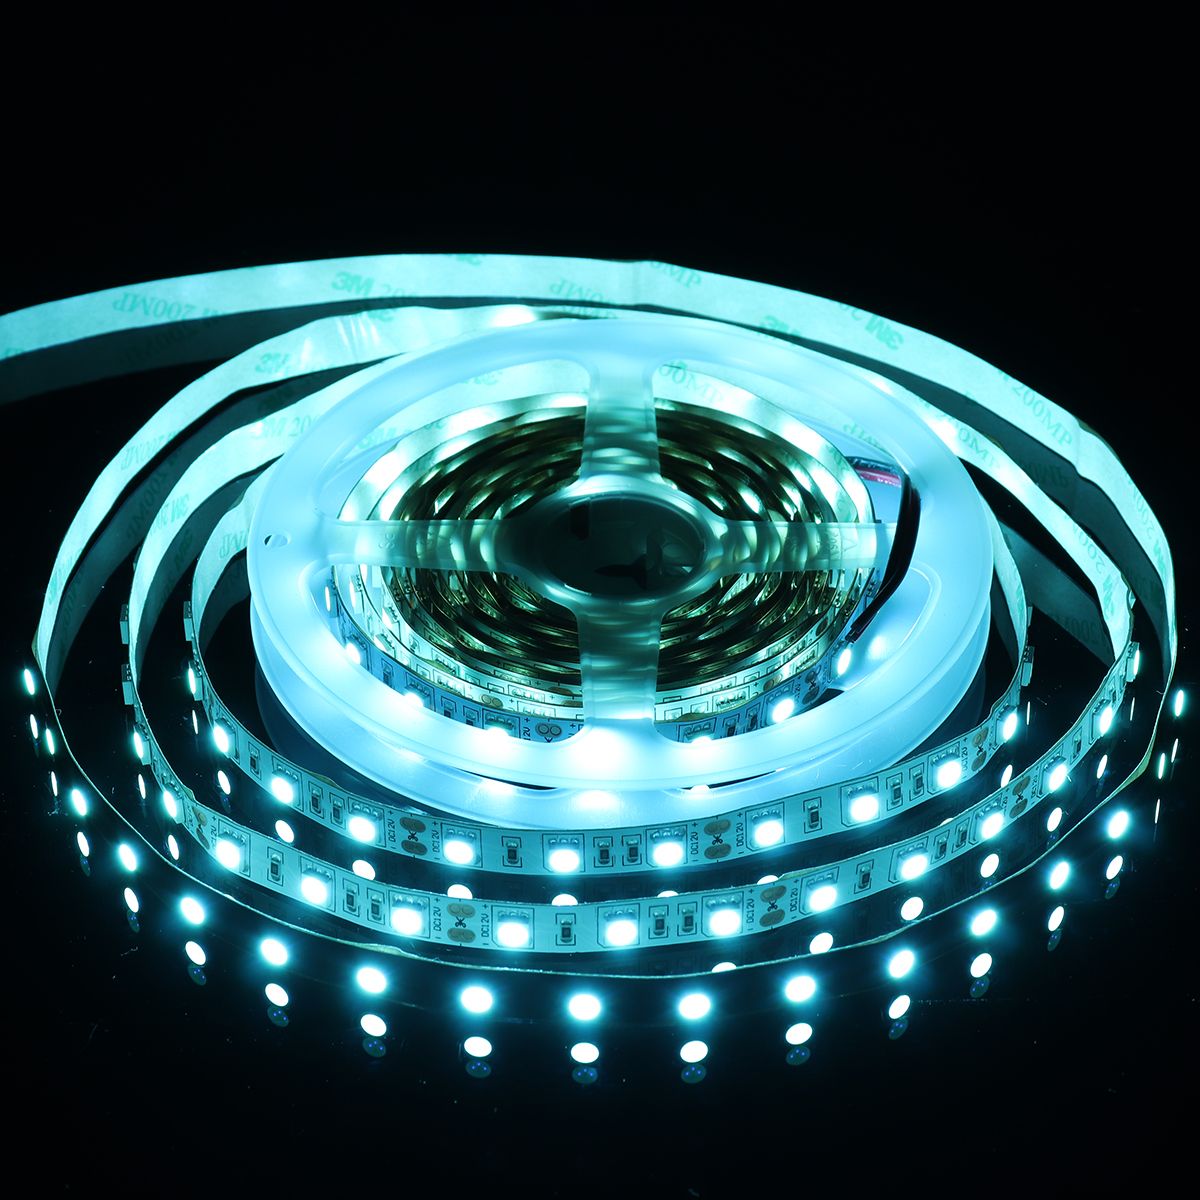 5M-SMD5050-Wave-Length-480nm-Ice-Blue-Non-waterproof-300-LED-Strip-Light-for-Car-Home-Decor-DC12V-1381594